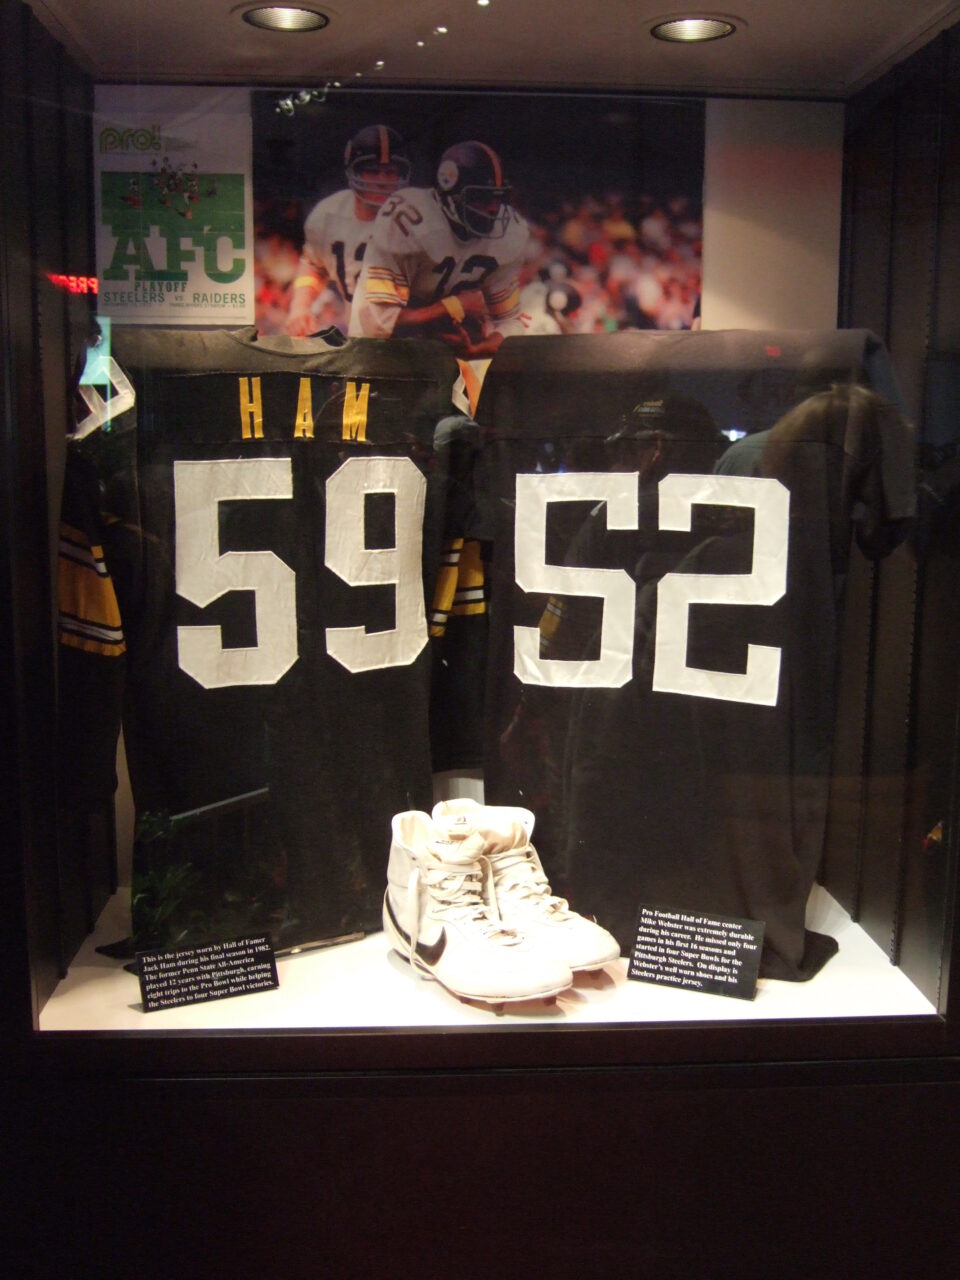 Football Jersey worn by Mike Webster for the Steelers (right)